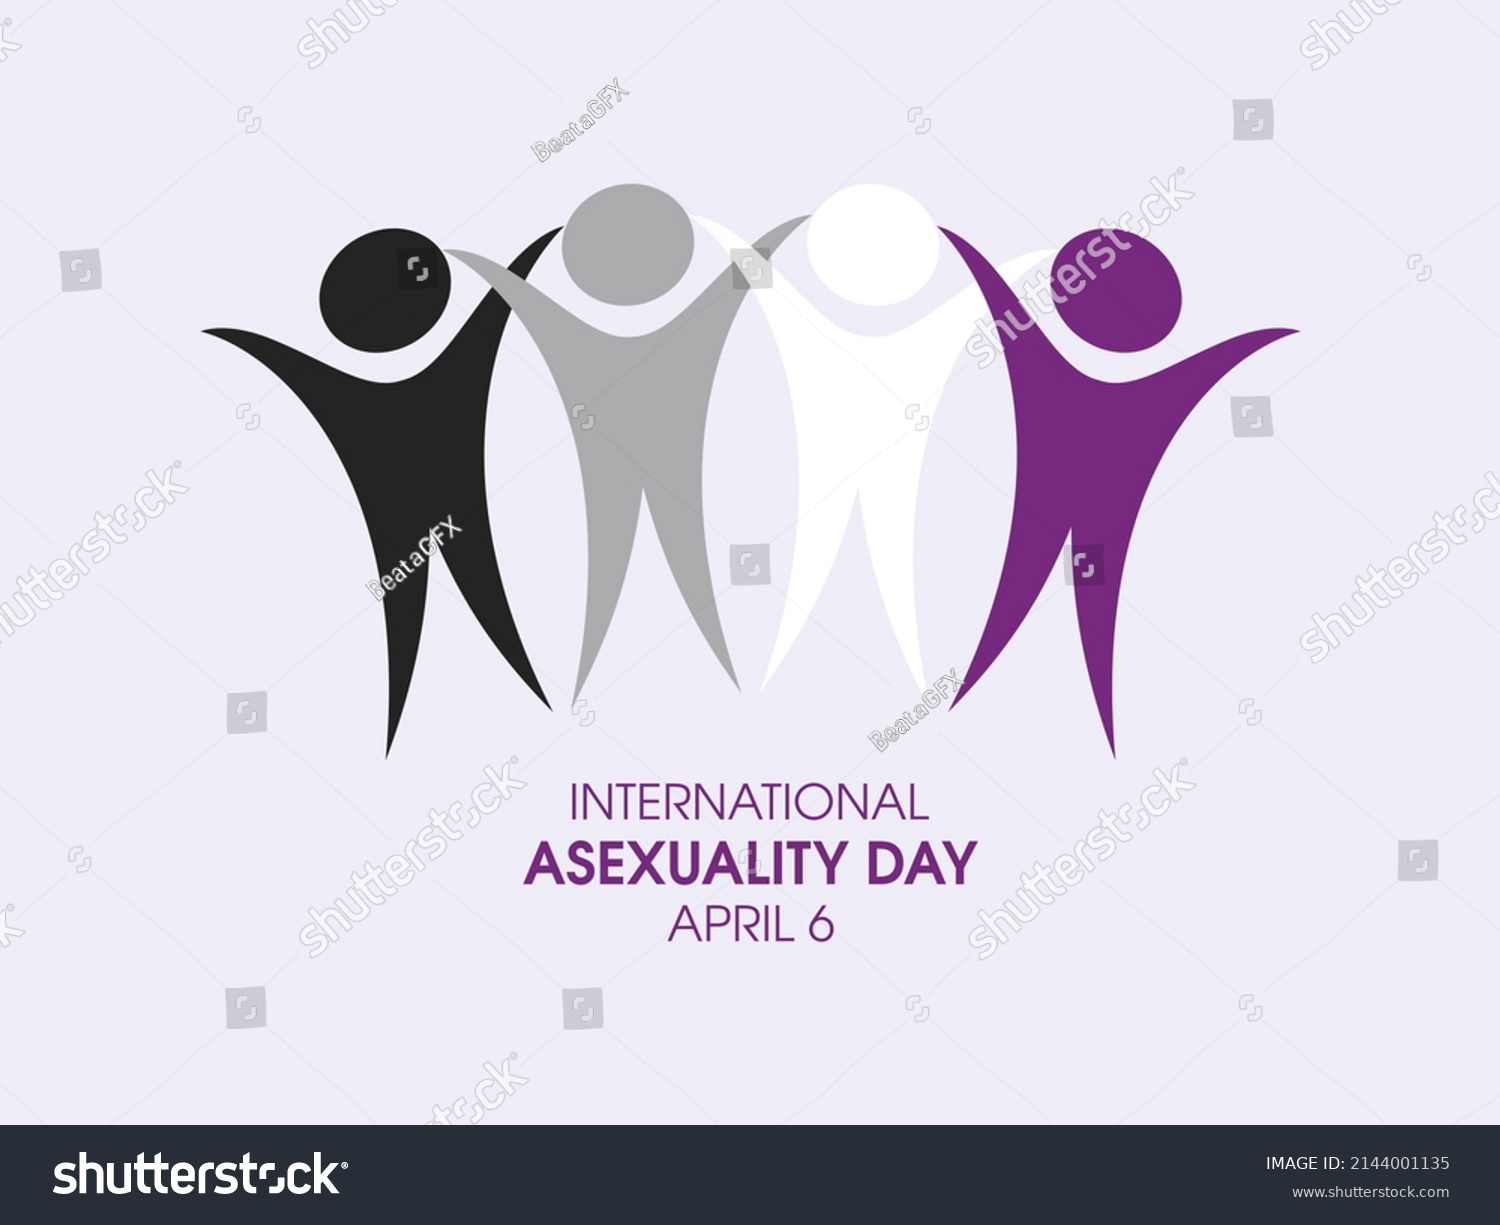 International Asexuality Day Illustration Group Asexual Ilustrações Stock 2144001135 Shutterstock 